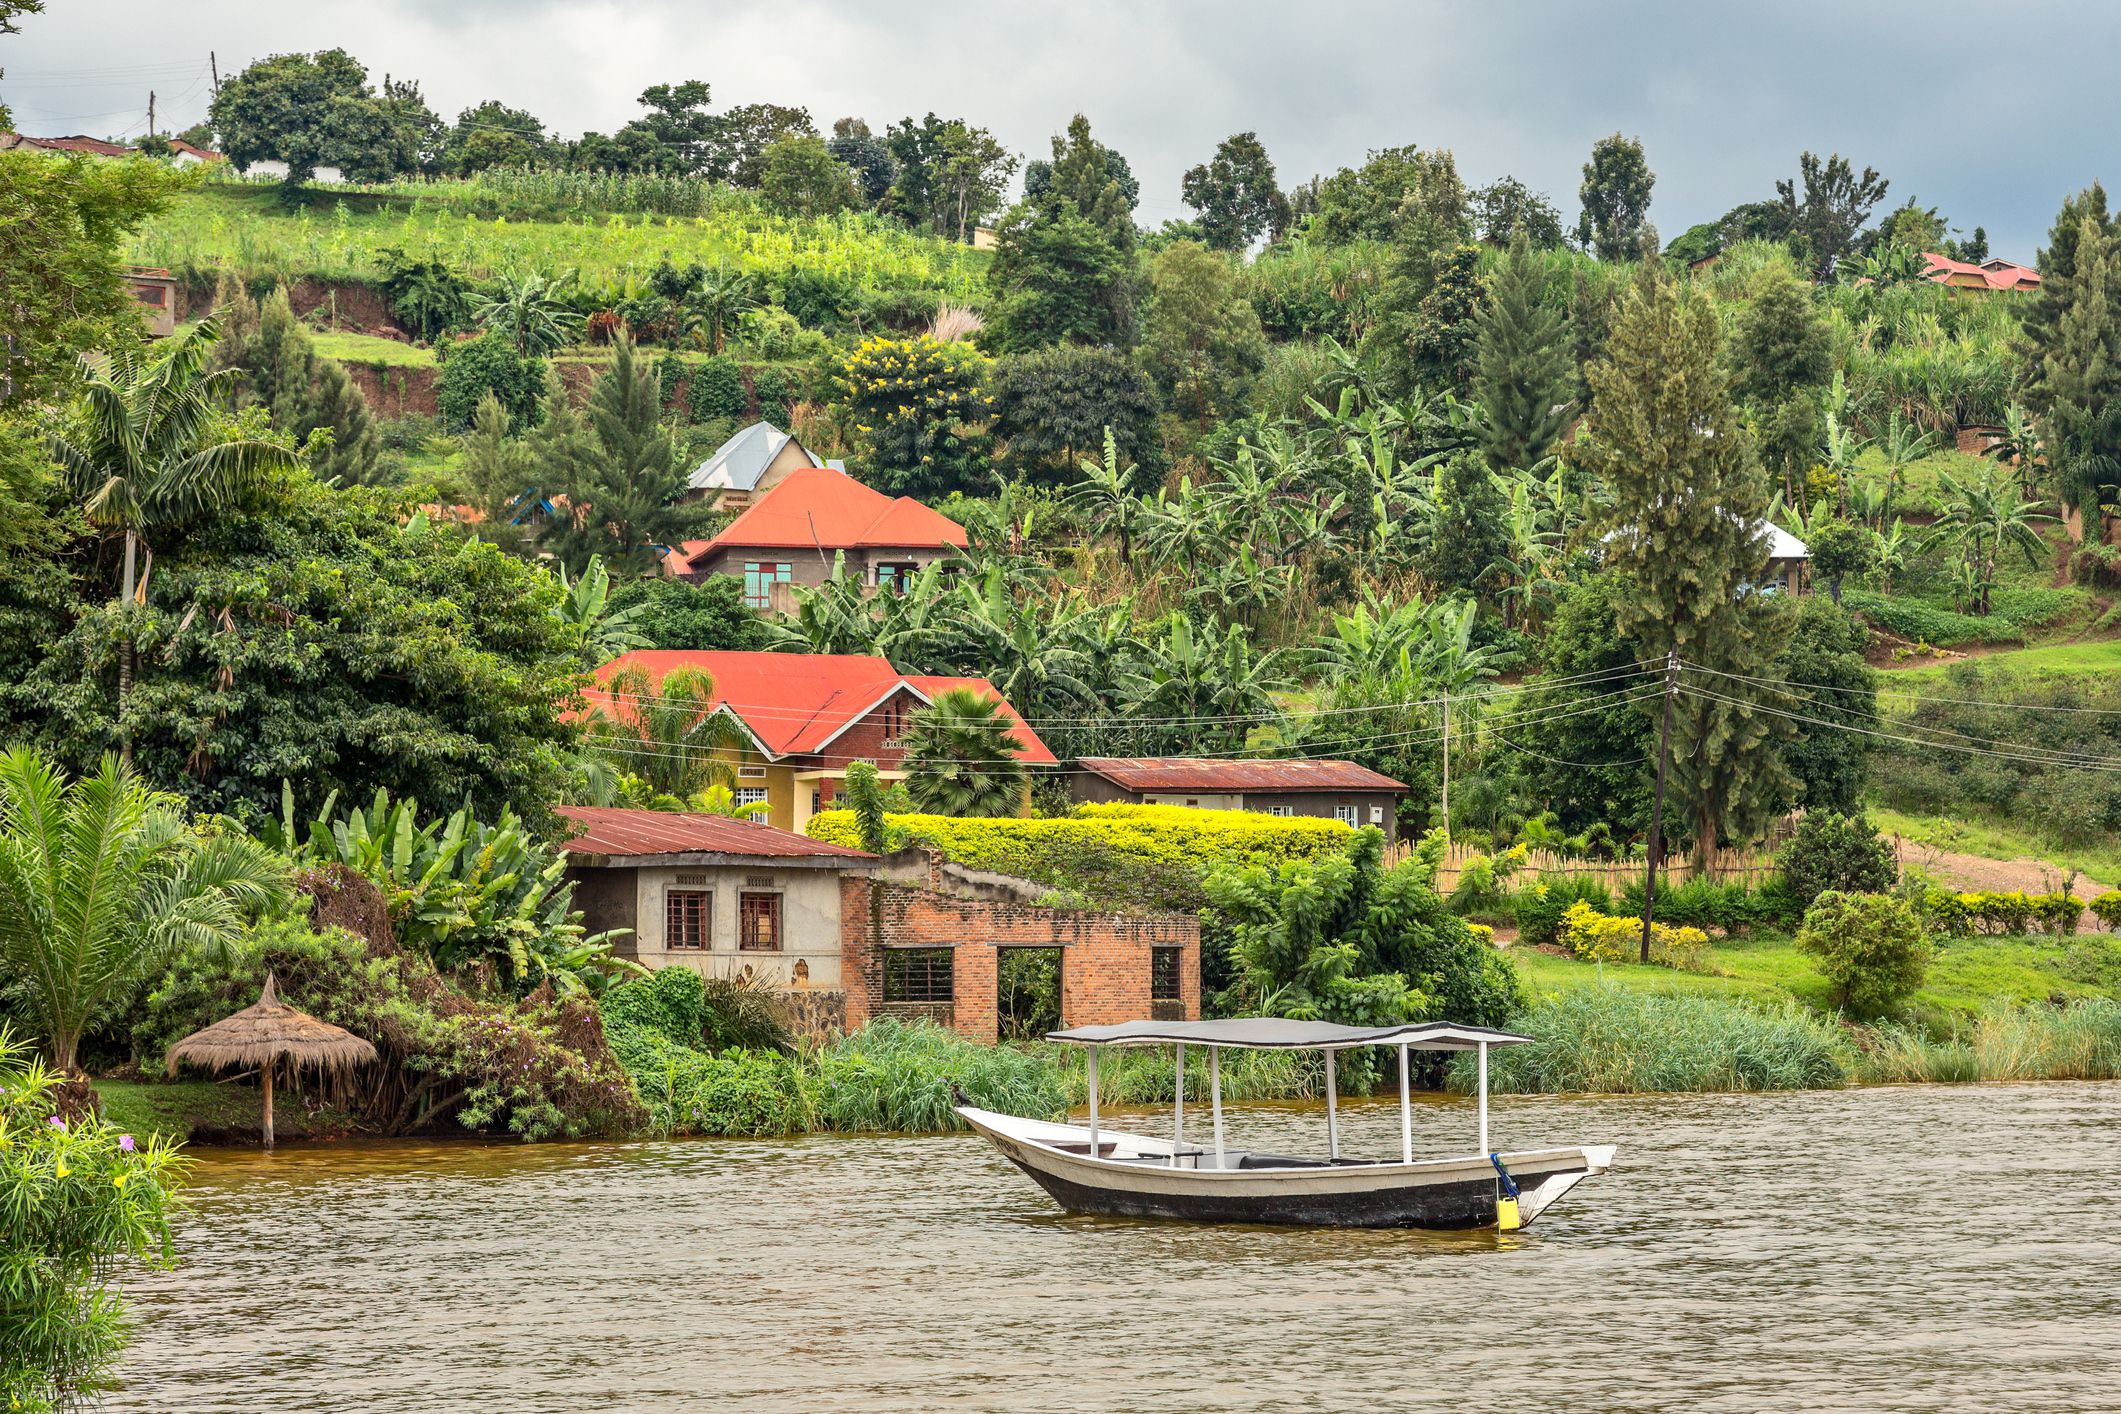 <p>Lake Kivu is another small destination hoping to make a big environmental difference. It’s home to a floating hotel, a solar-powered yacht and the Forest of Hope Guest House and Camp, which tracks local chimpanzees and monkeys and replants trees in deforested areas of the lakeside. </p>